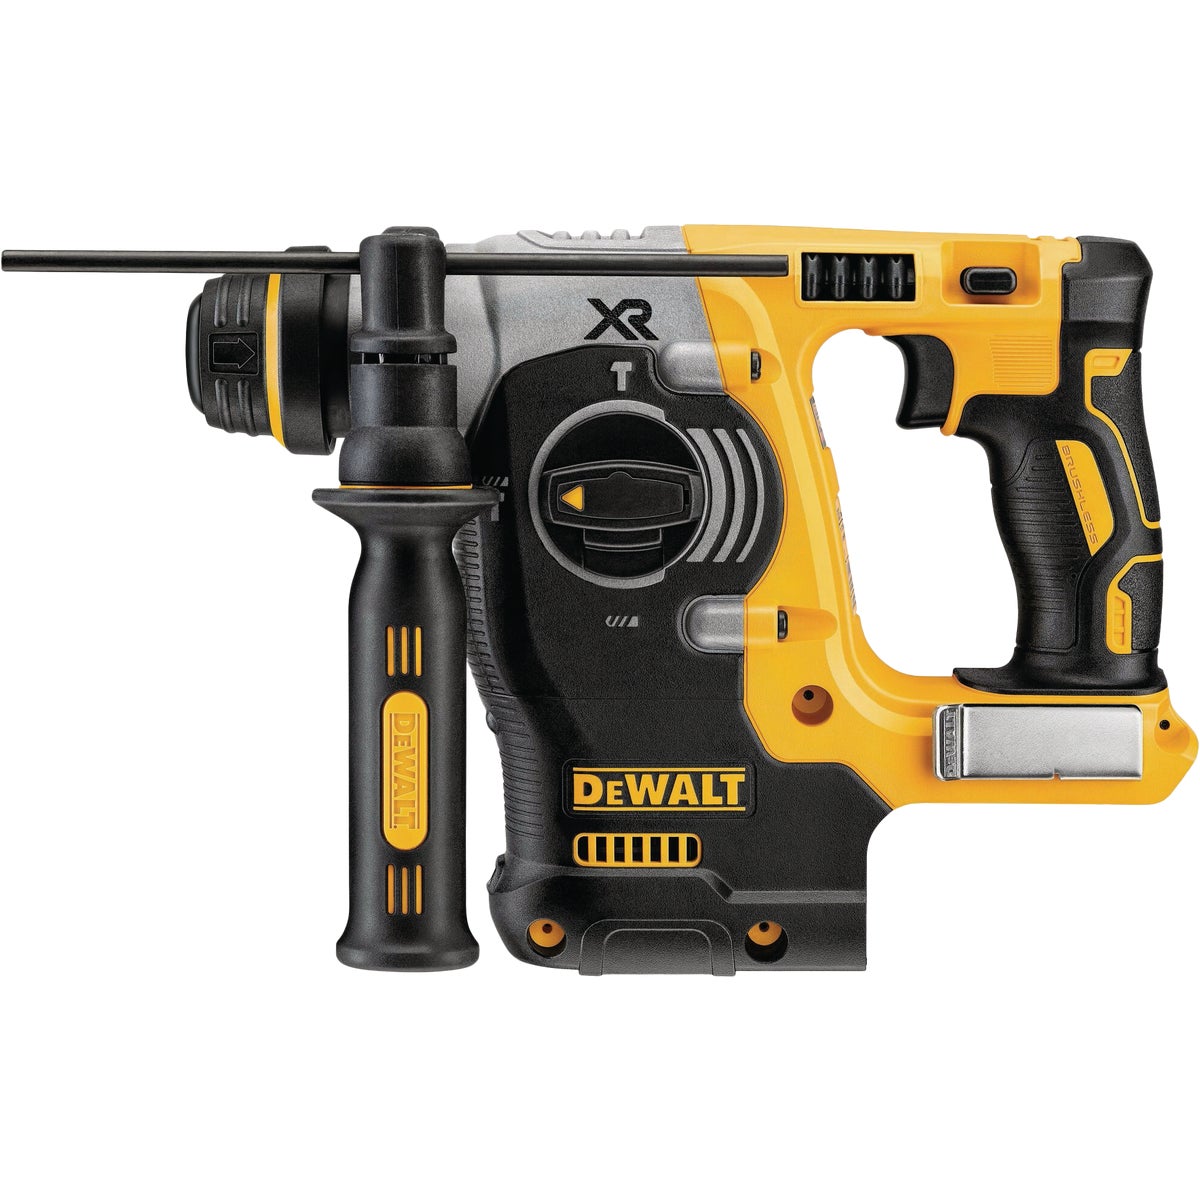 DEWALT 20V MAX XR 1 In. SDS-Plus L-Shape Brushless Cordless Rotary Hammer Drill (Tool Only)